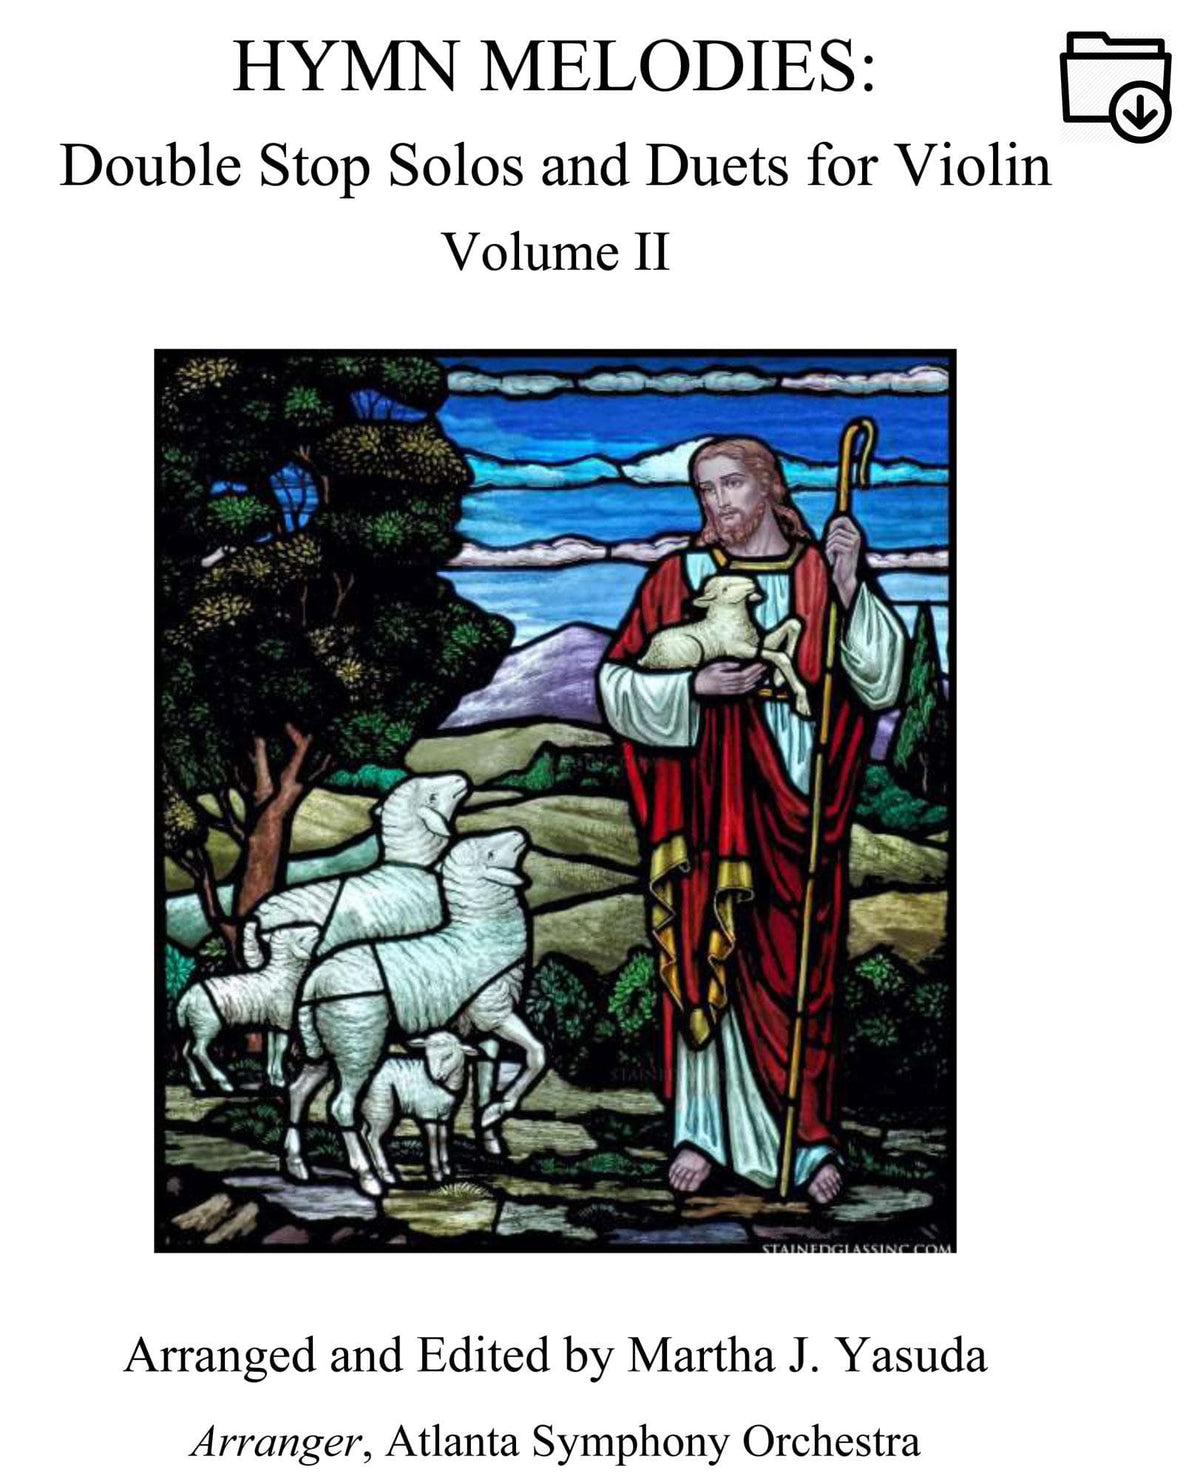 Yasuda, Martha - Hymn Melodies: Double Stop Solos and Duets For Violin, Volume II - Digital Download